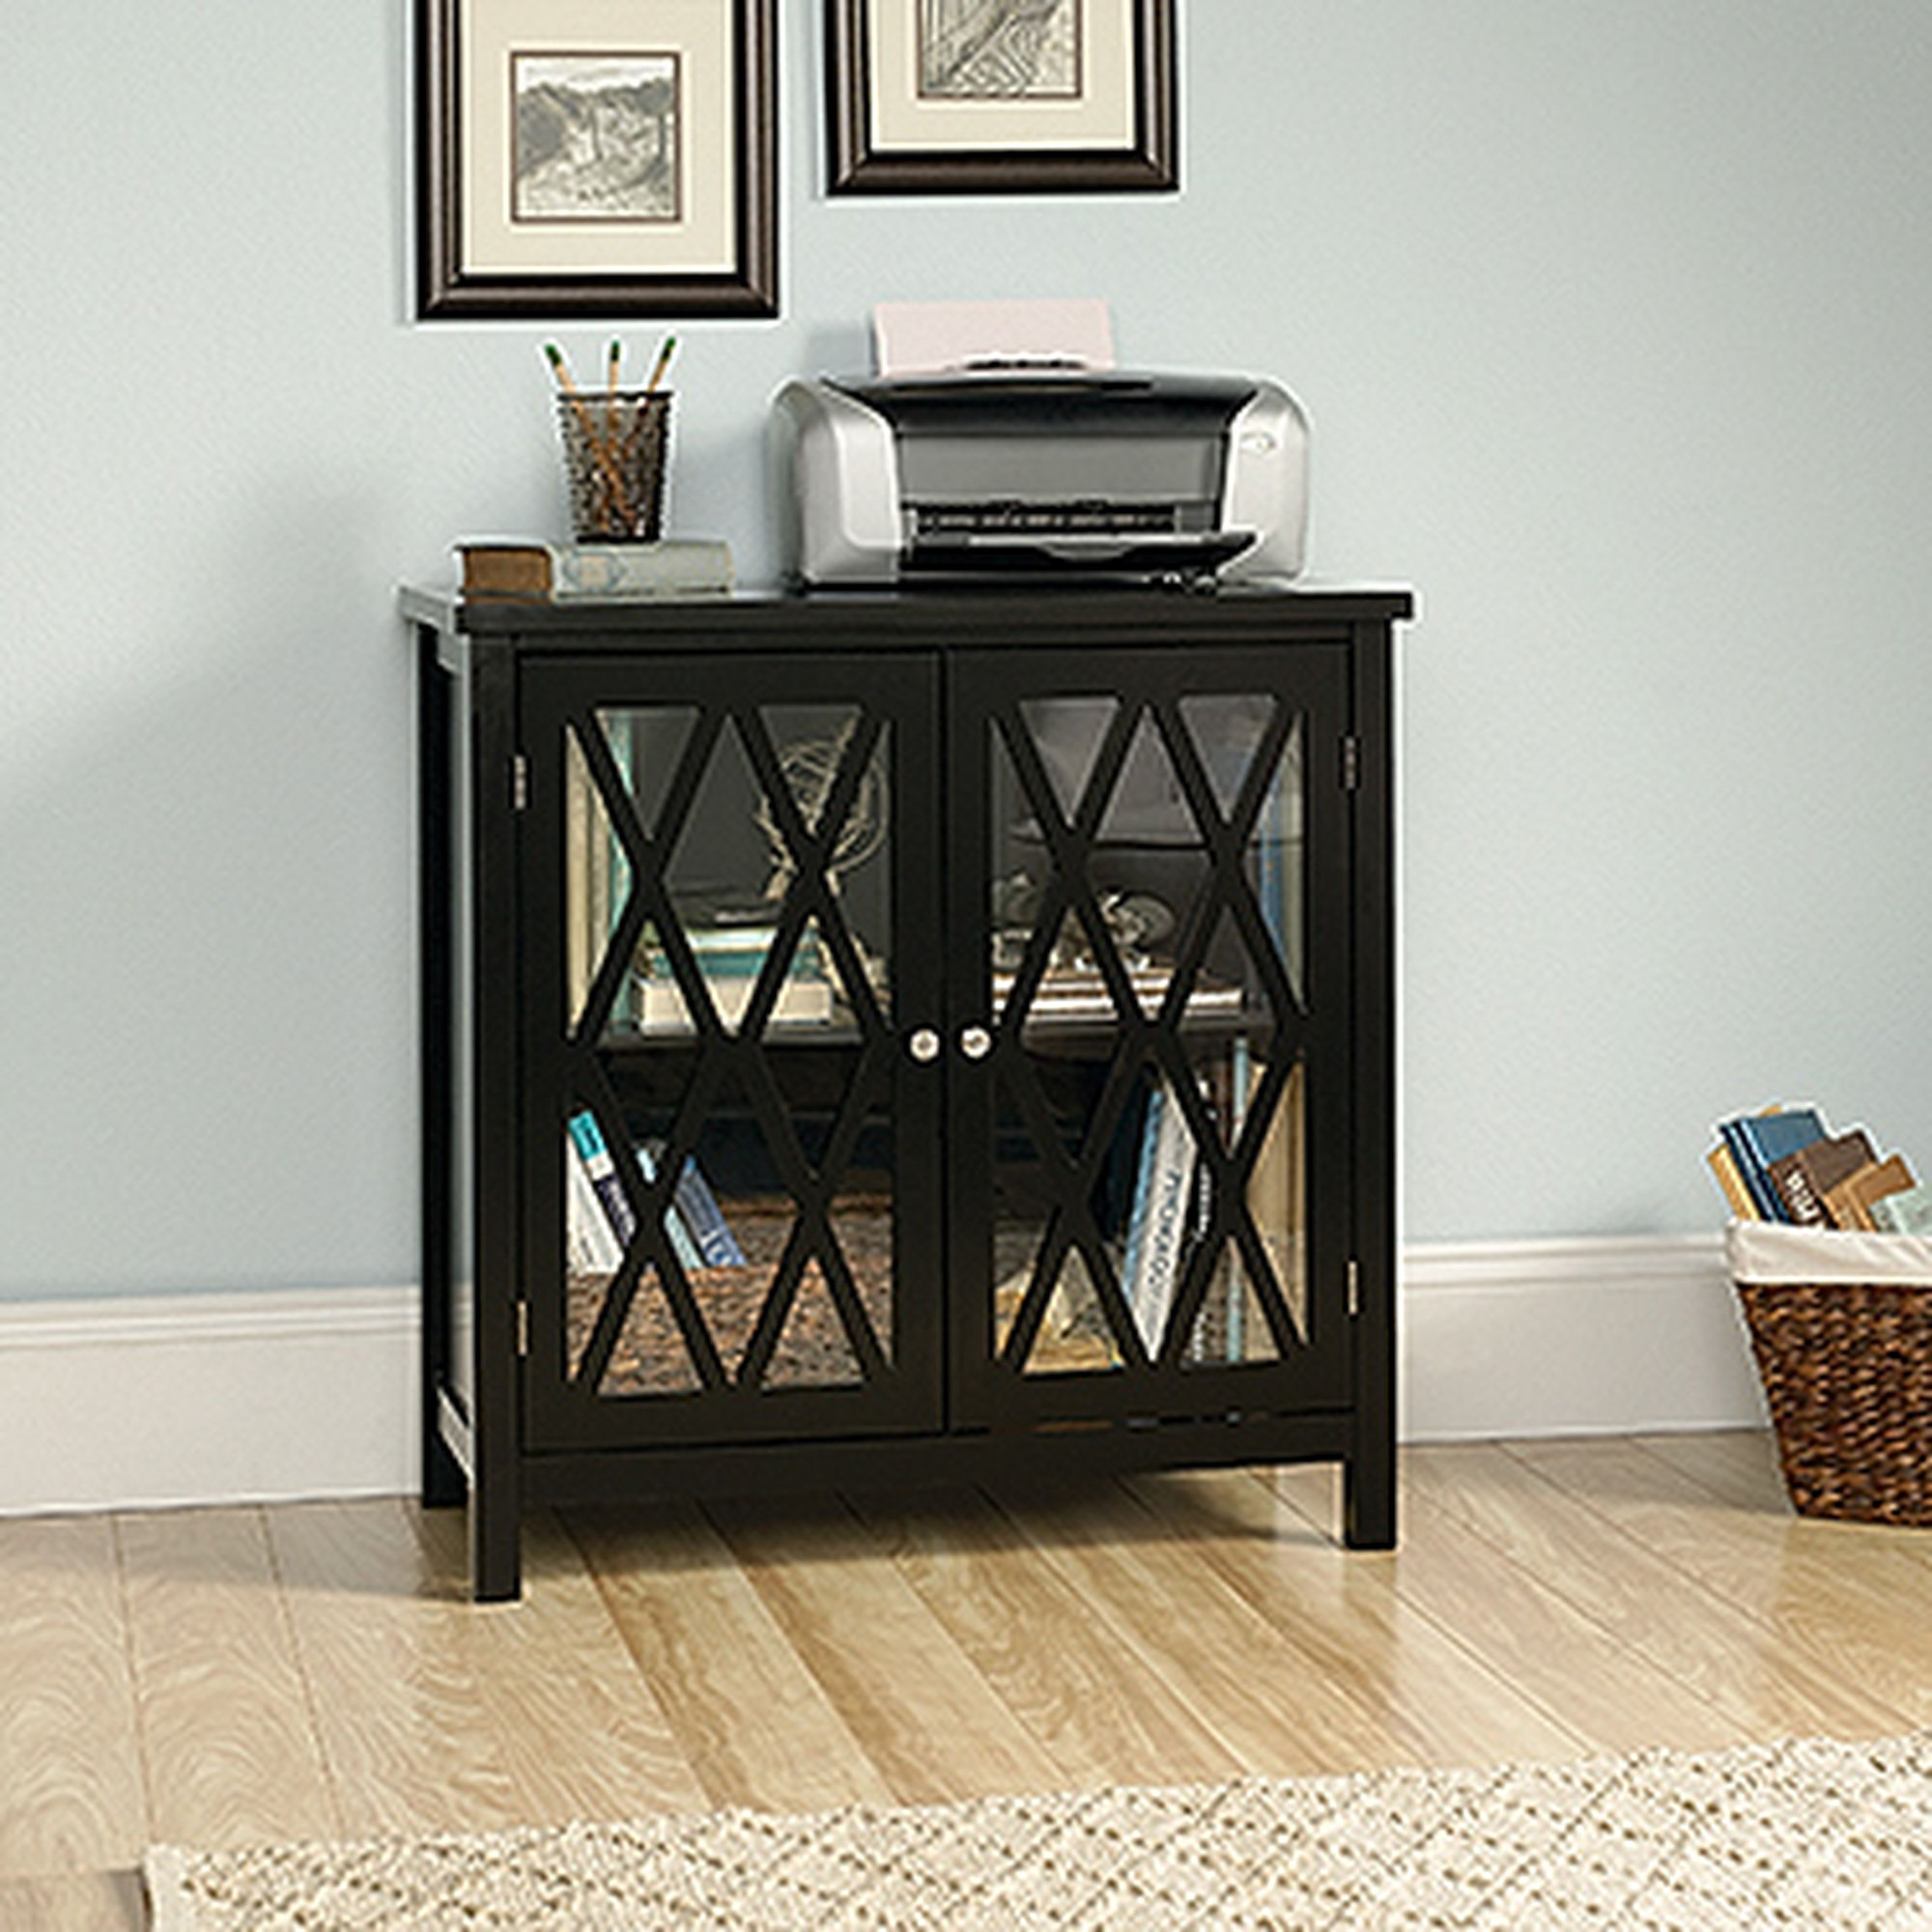 two door contemporary accent storage cabinet black furniture yellow tall narrow entryway table ikea childrens solutions small round dining upholstered arm chair pier one lamps